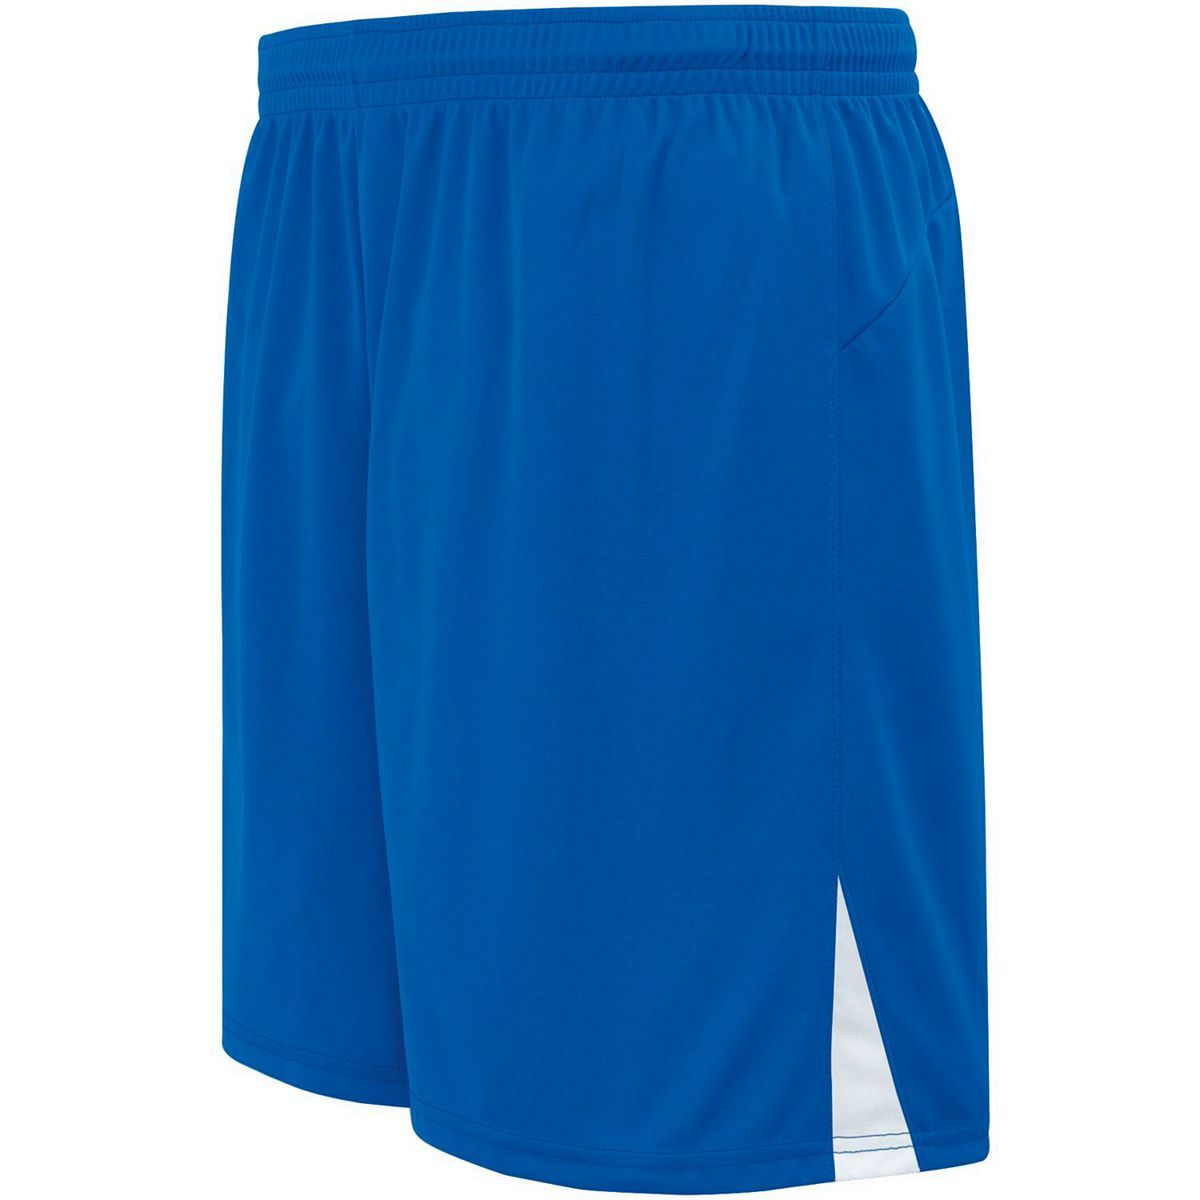 High 5 Ladies Hawk Shorts in Royal/White  -Part of the Ladies, Ladies-Shorts, High5-Products, Soccer, All-Sports-1 product lines at KanaleyCreations.com